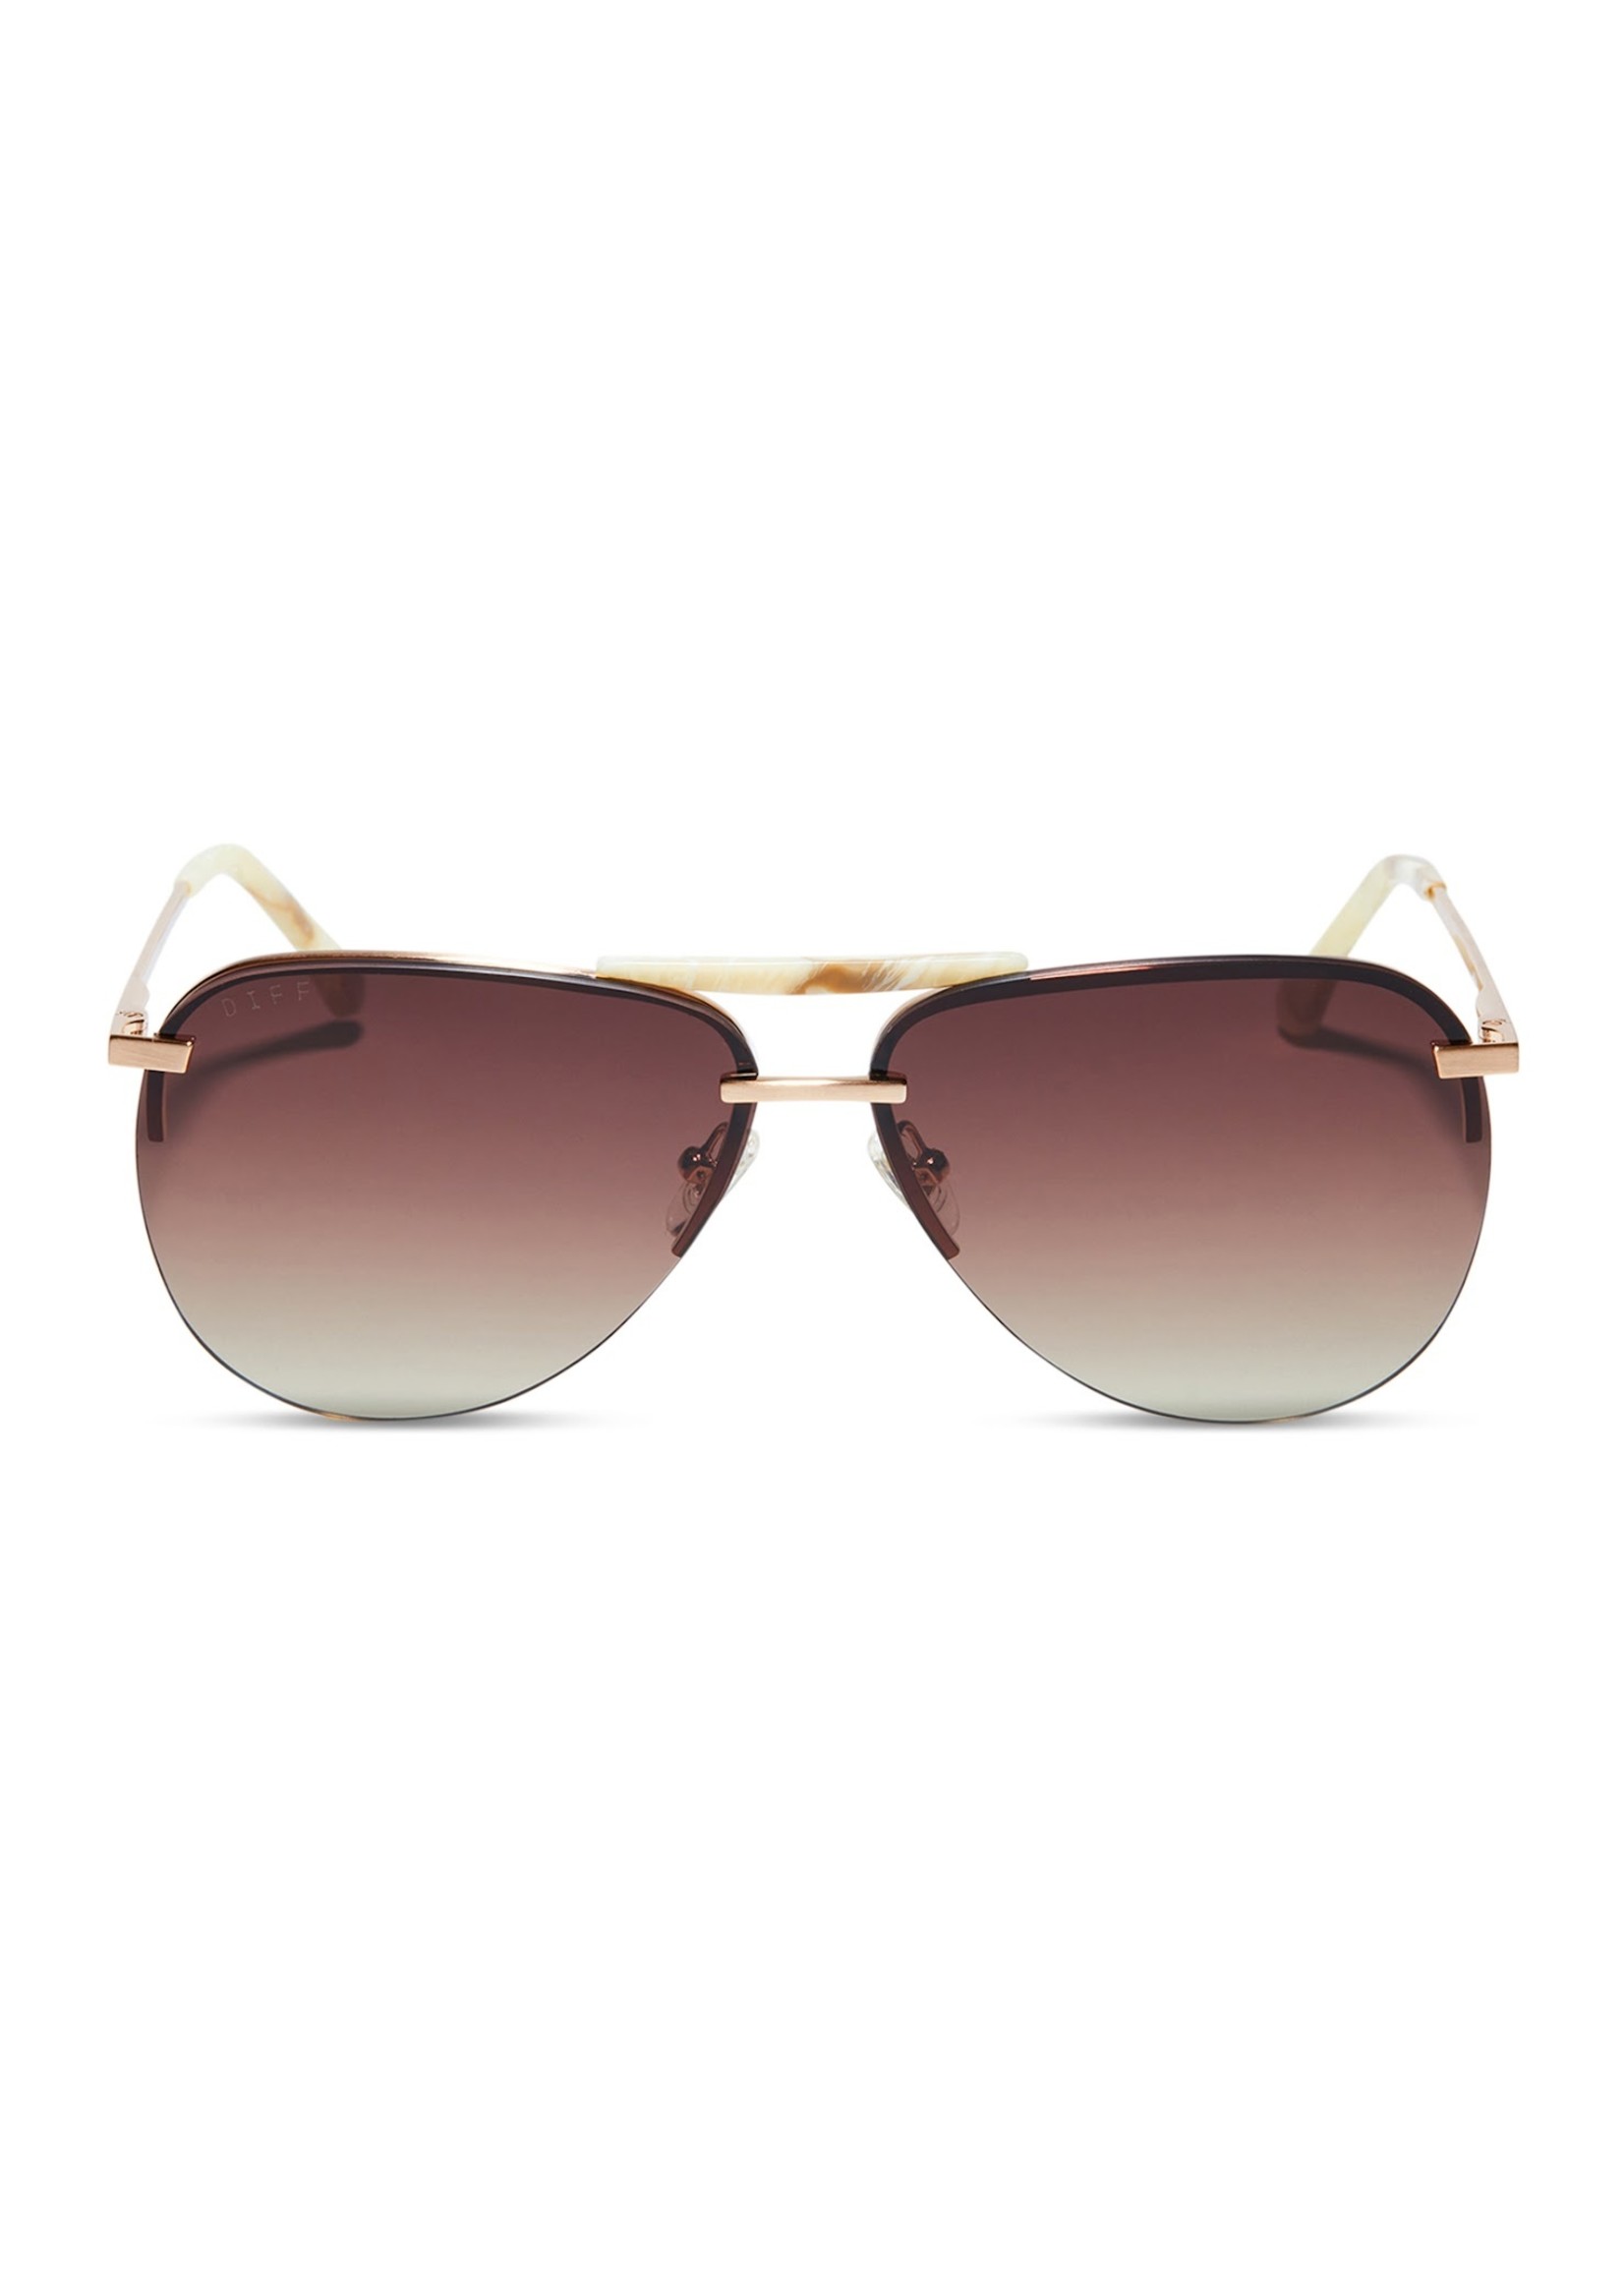 DIFF Tahoe: Brushed Gold Brown Gradient Polarized